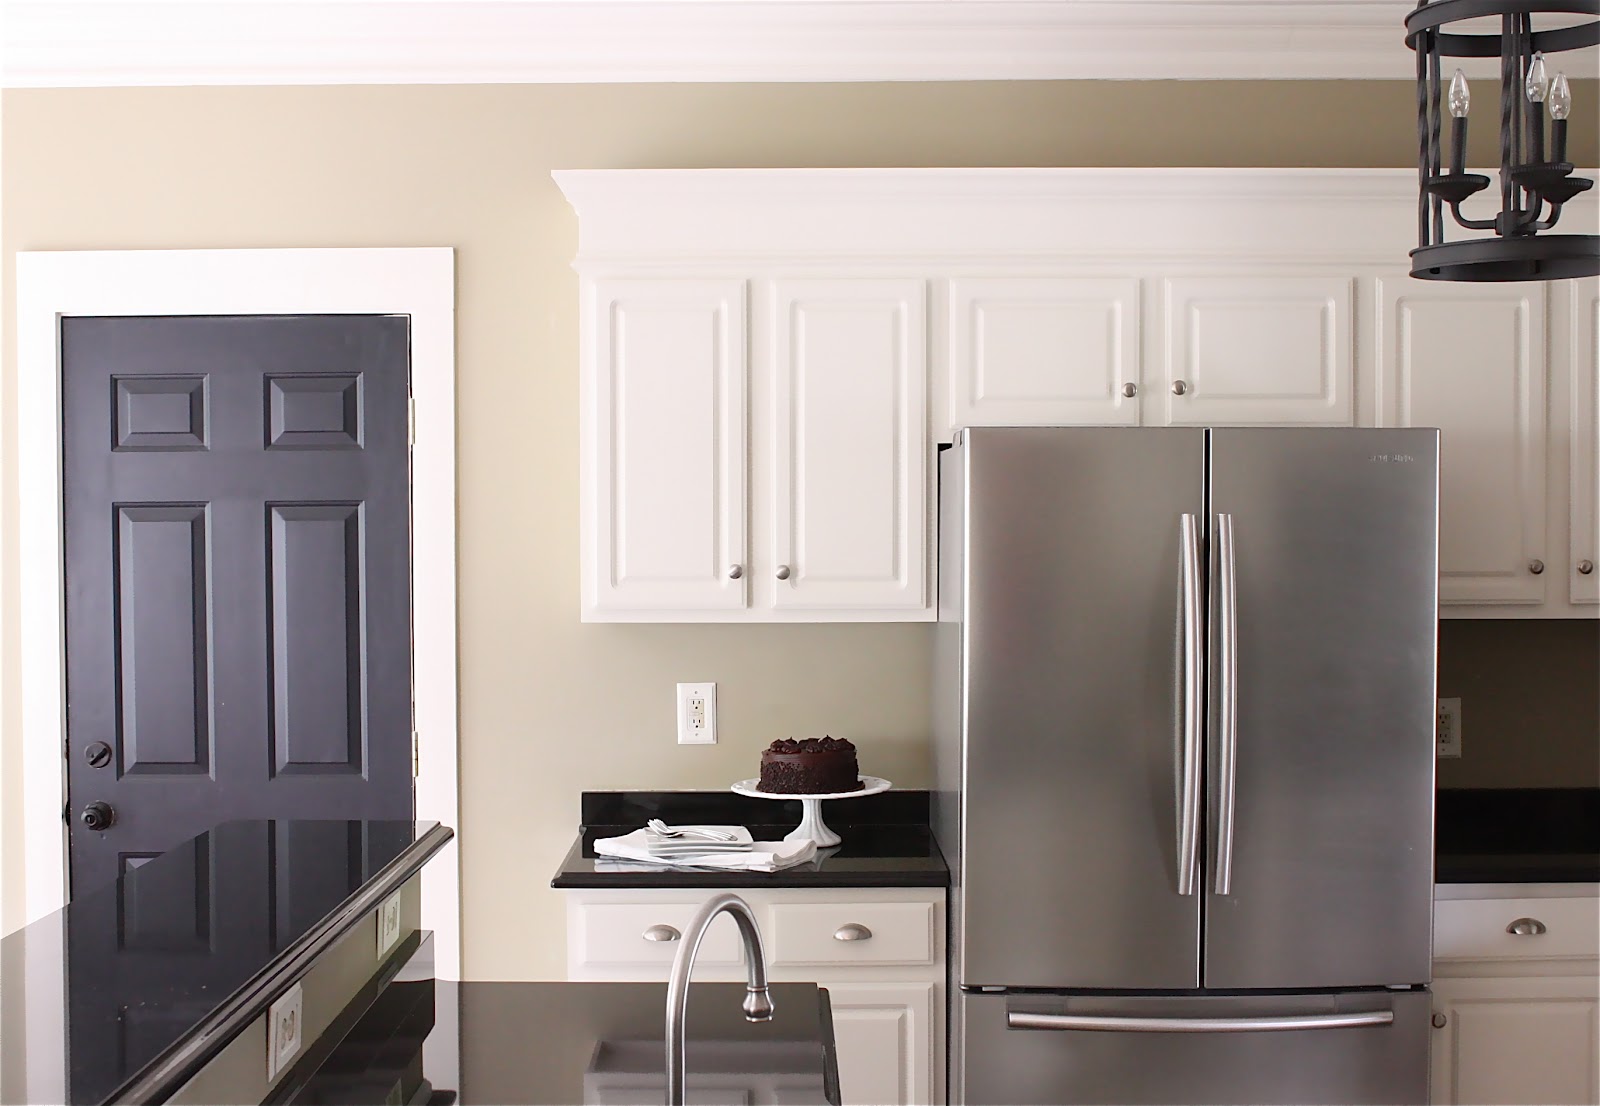 Kitchen Cabinets White Paint Quicuacom